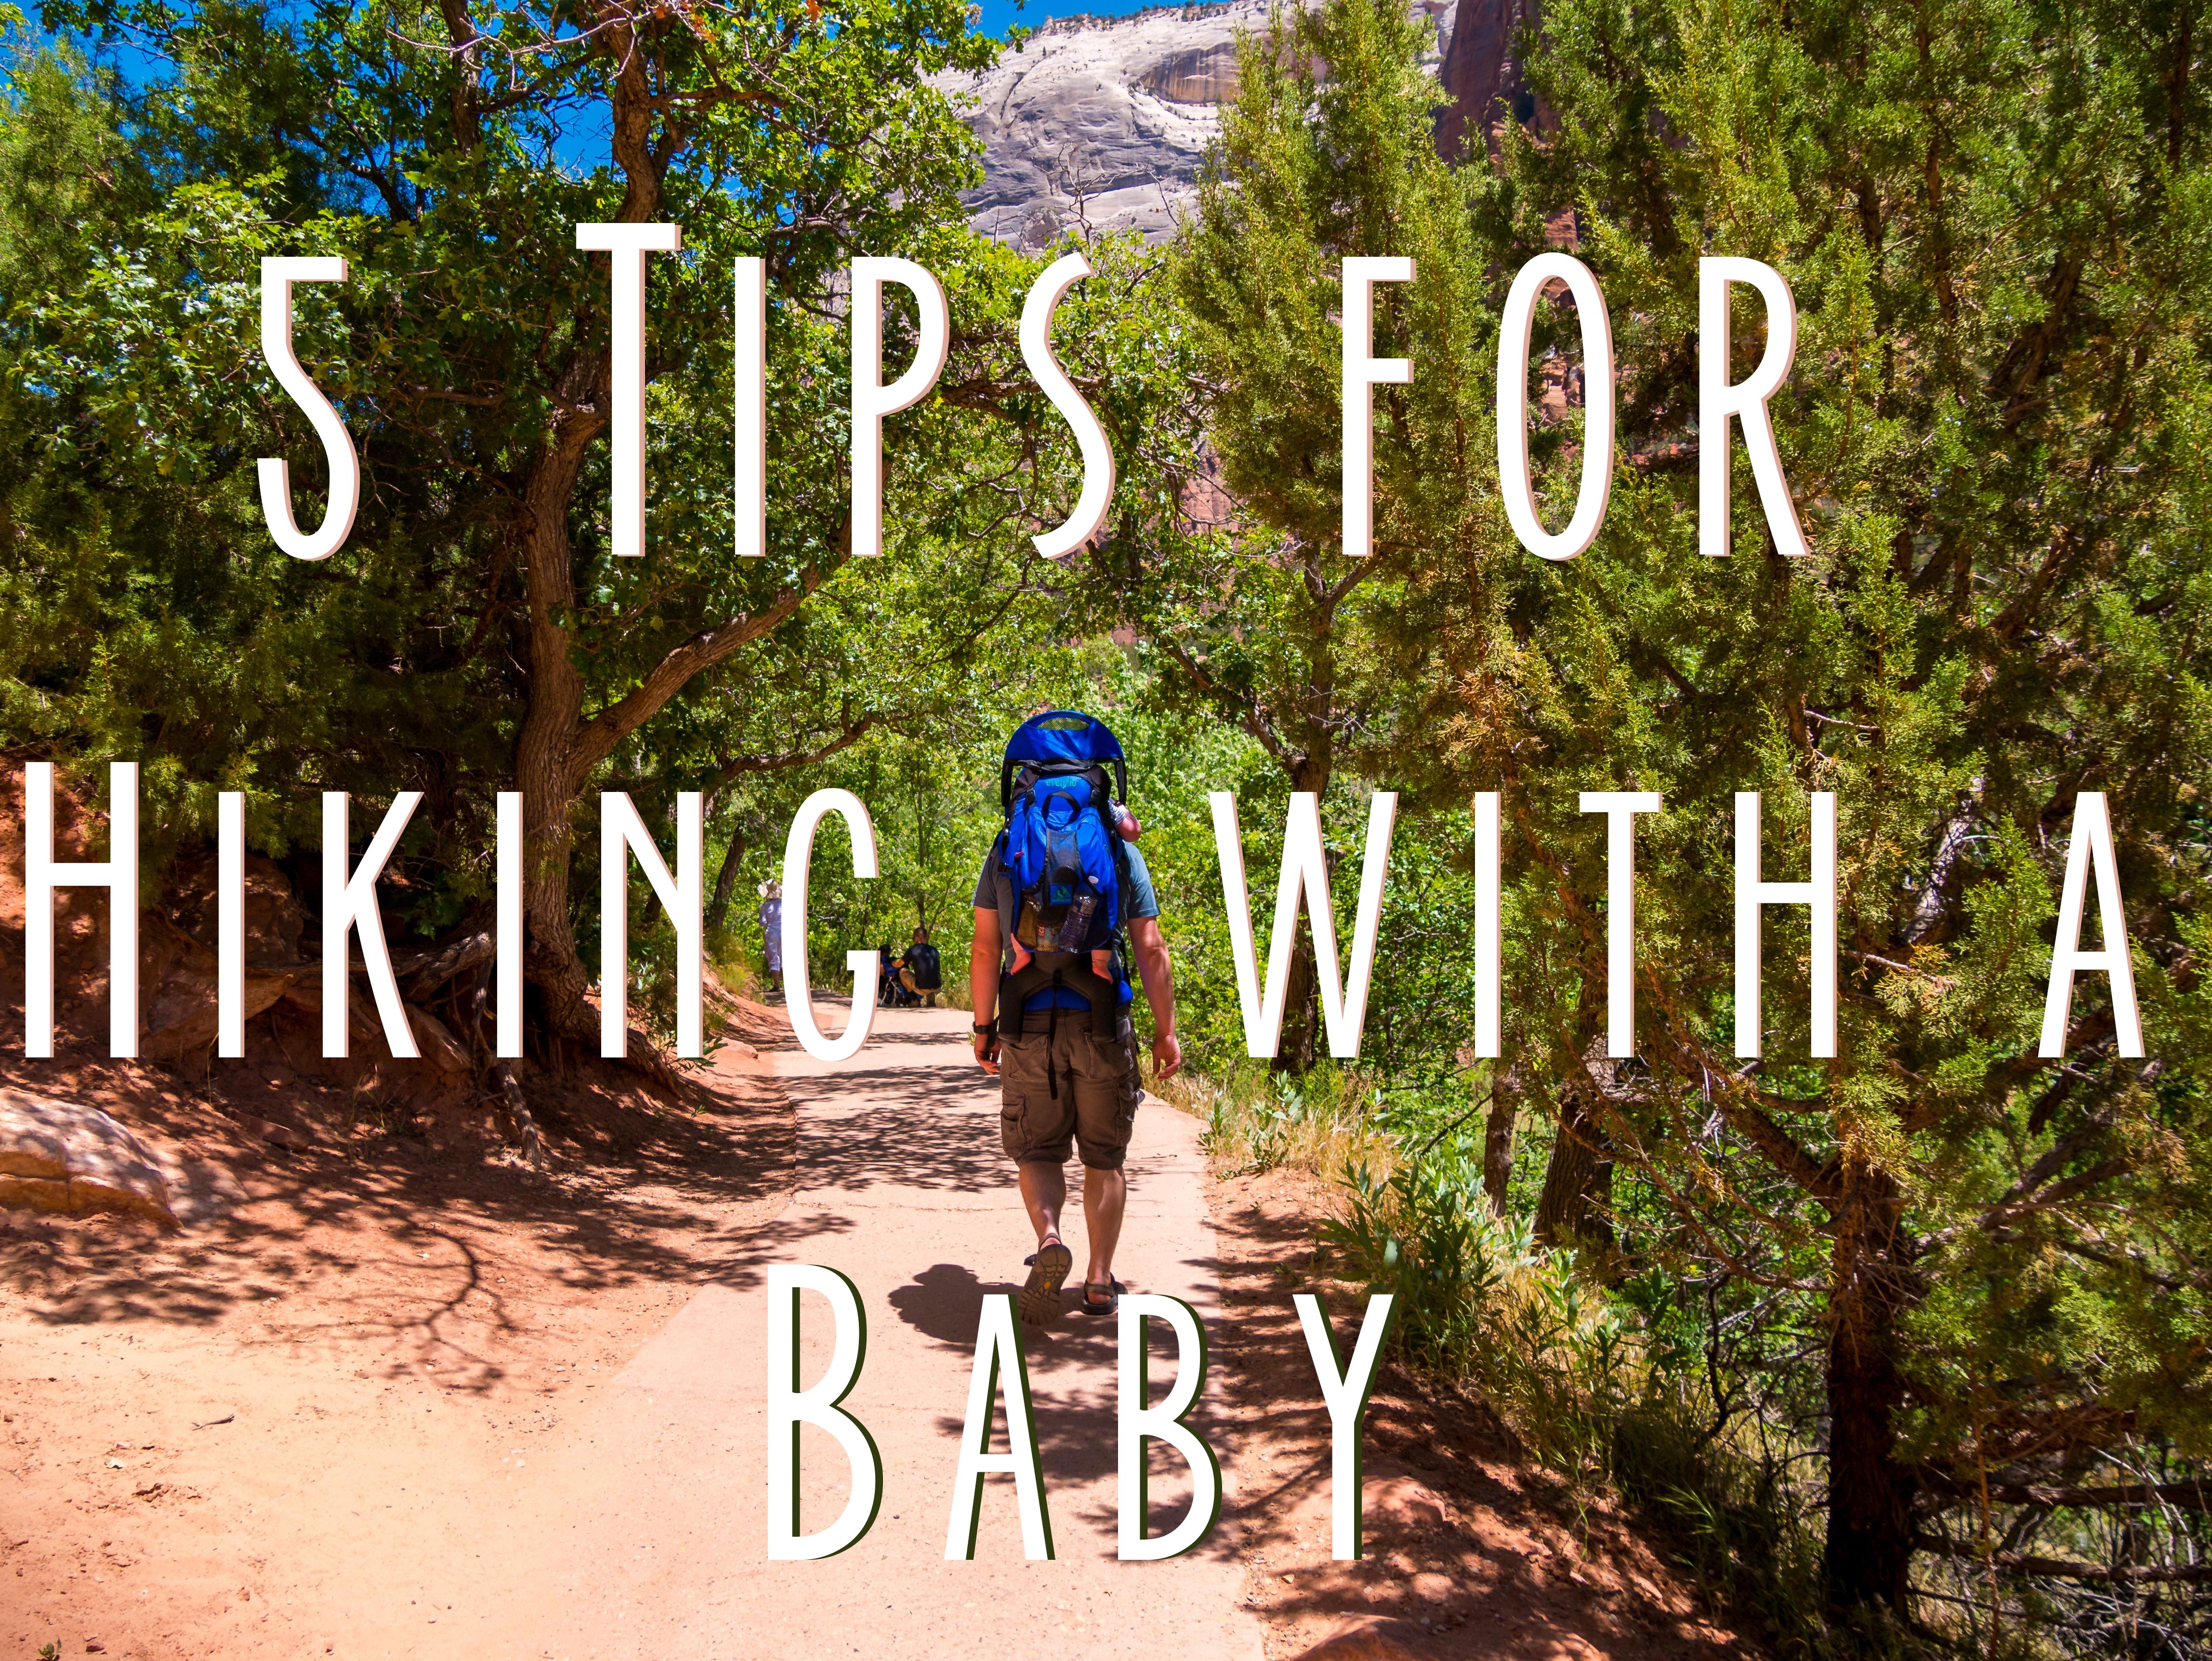 Title card showing ben hiking with a baby and text "5 Tips for hiking with a baby